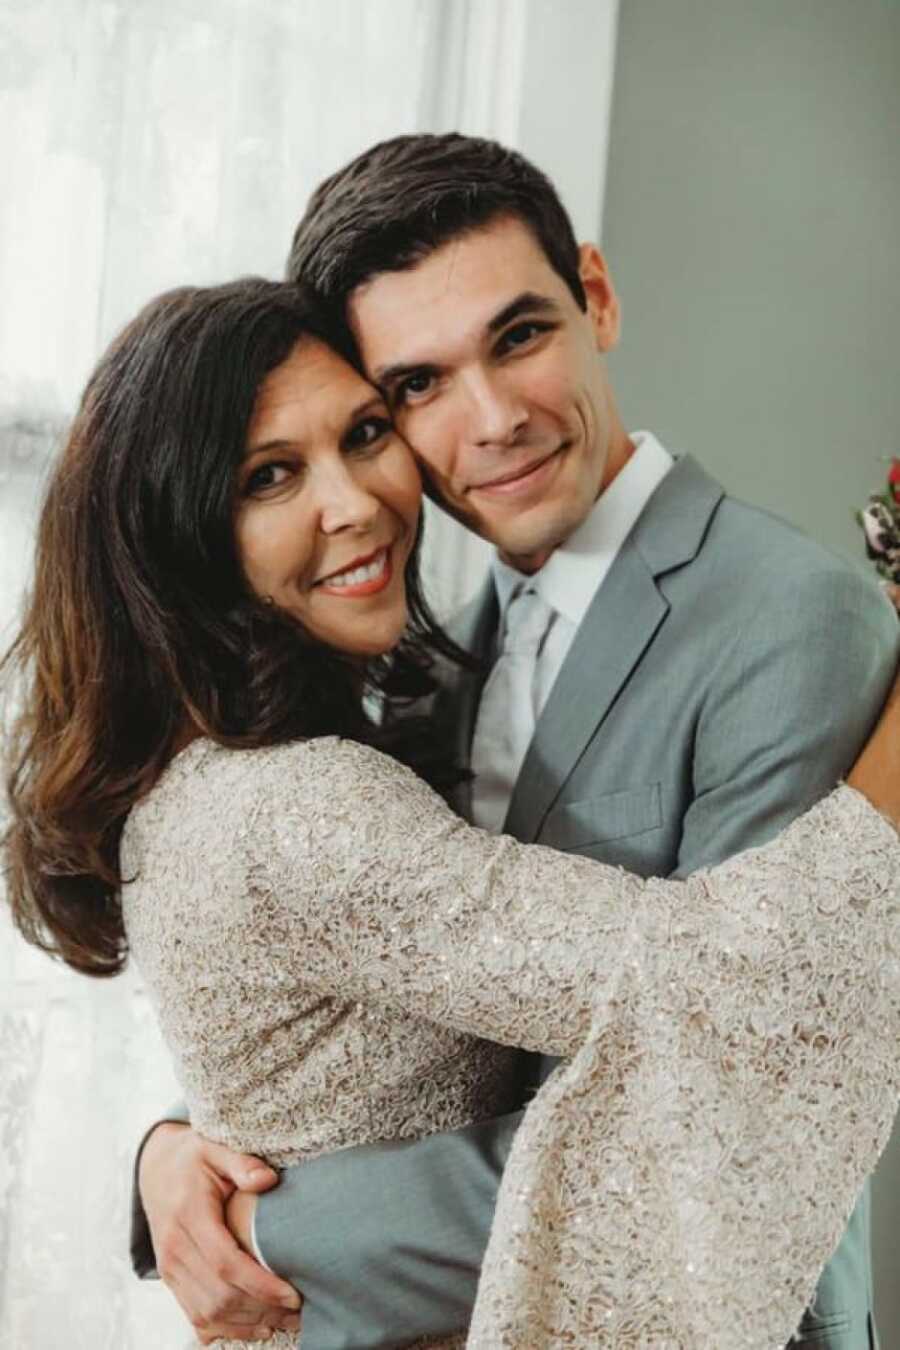 mom holding her son close on his wedding day for the photographer